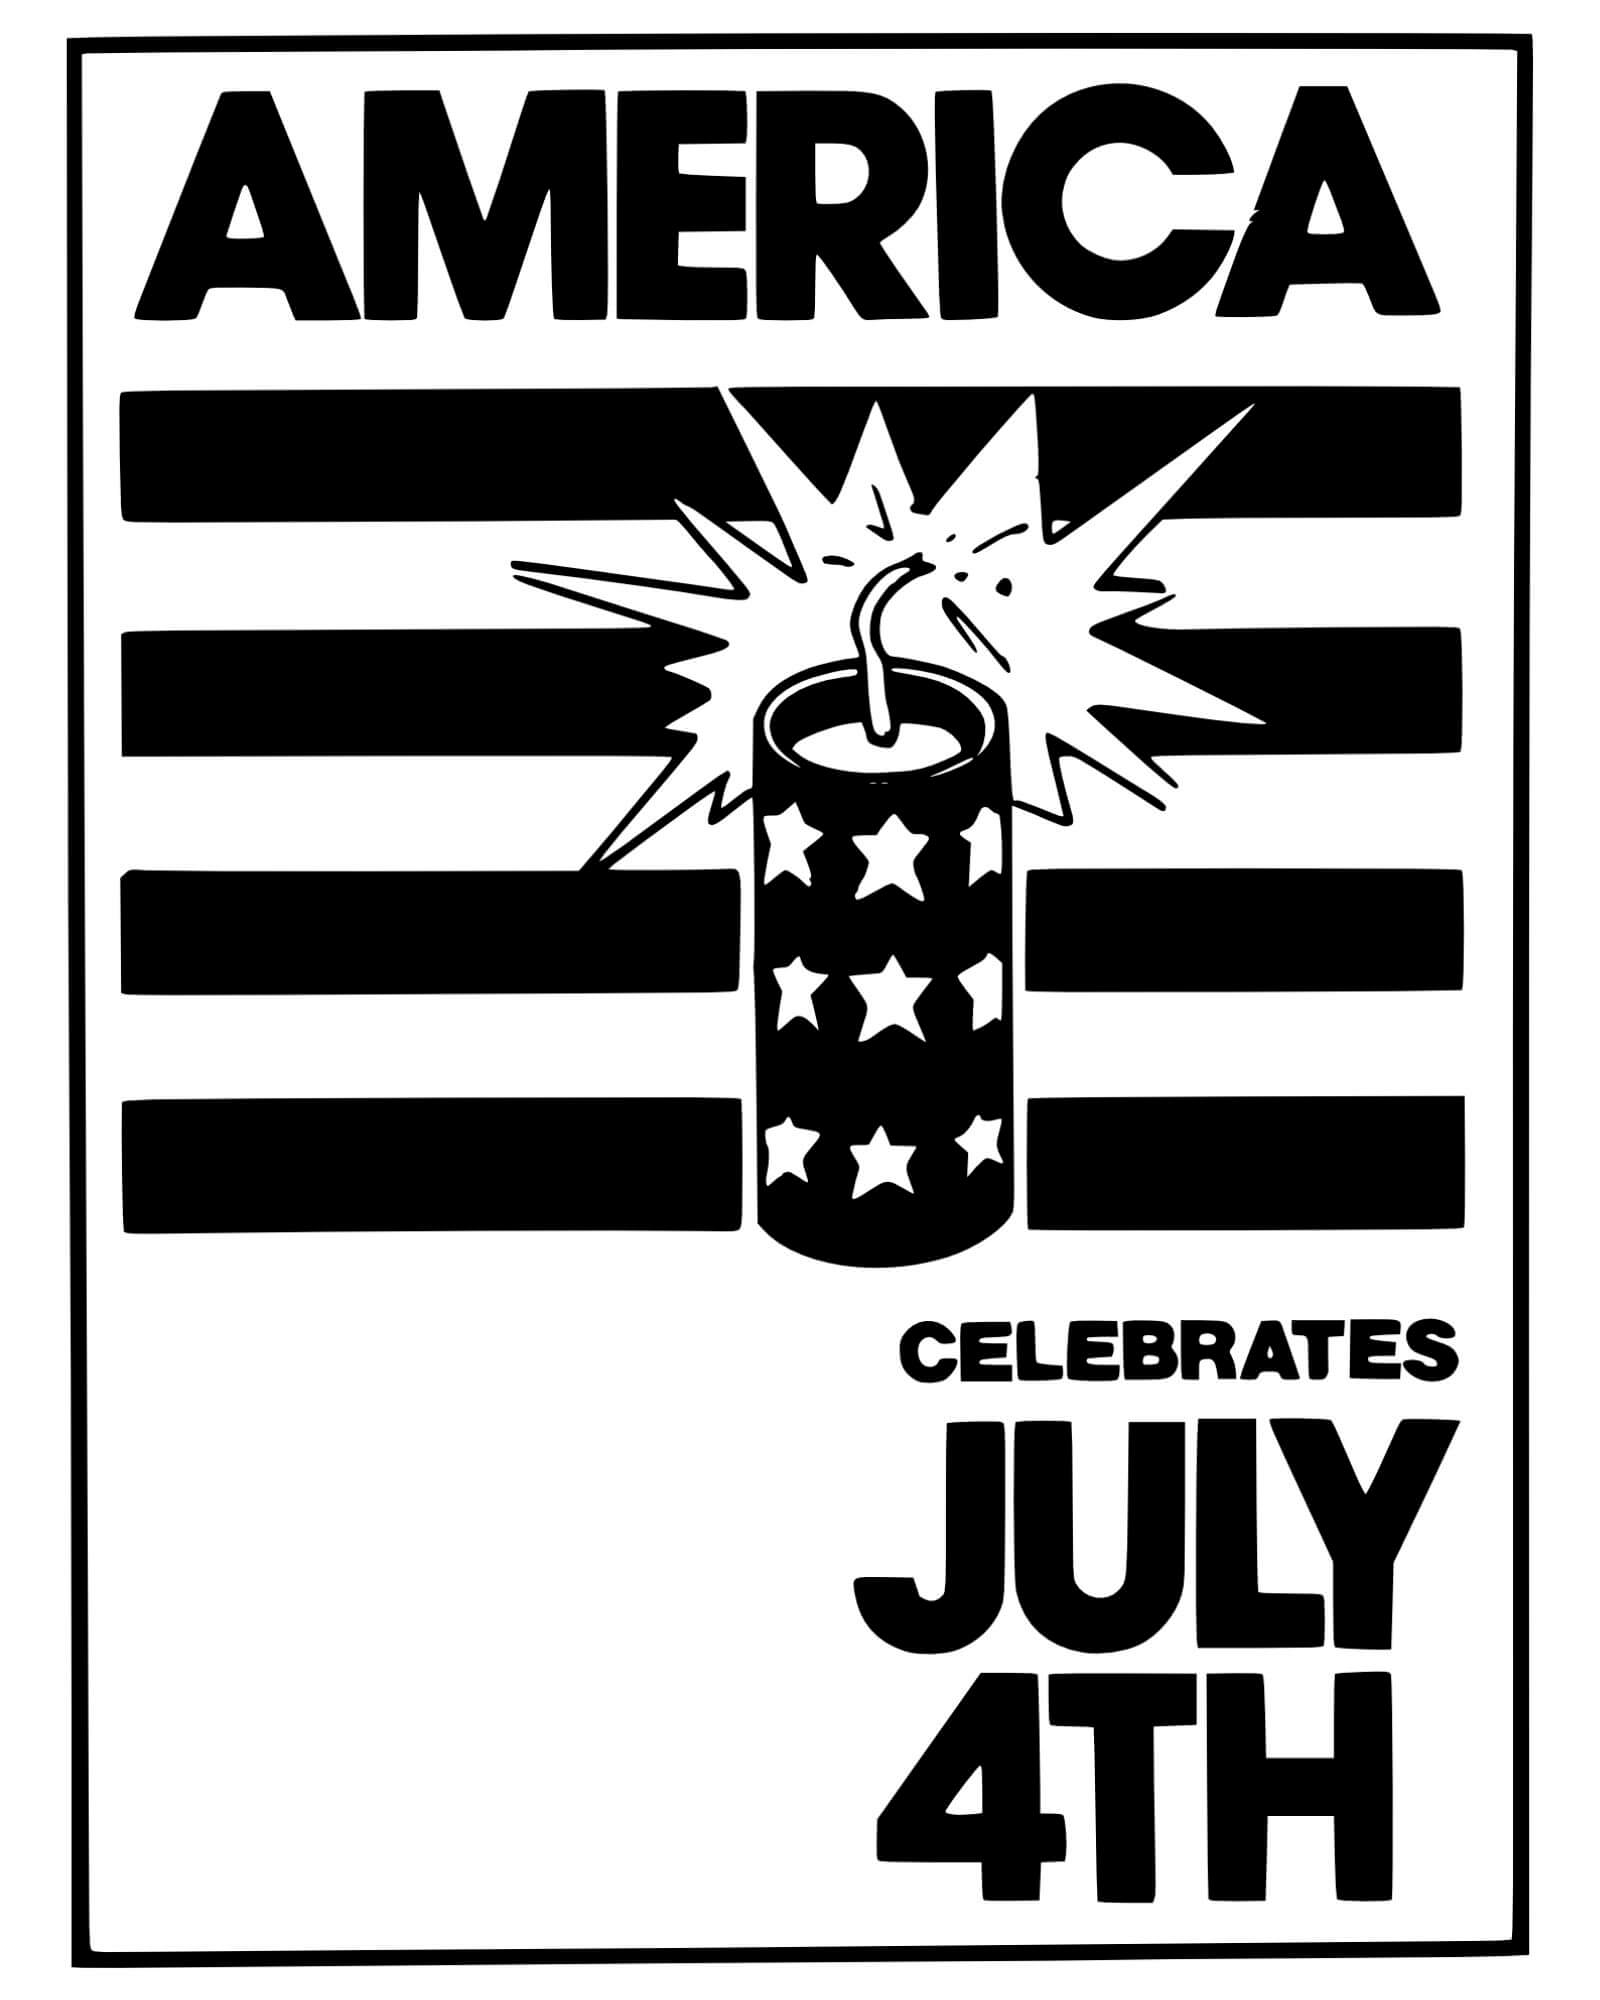 America July 4th black and white